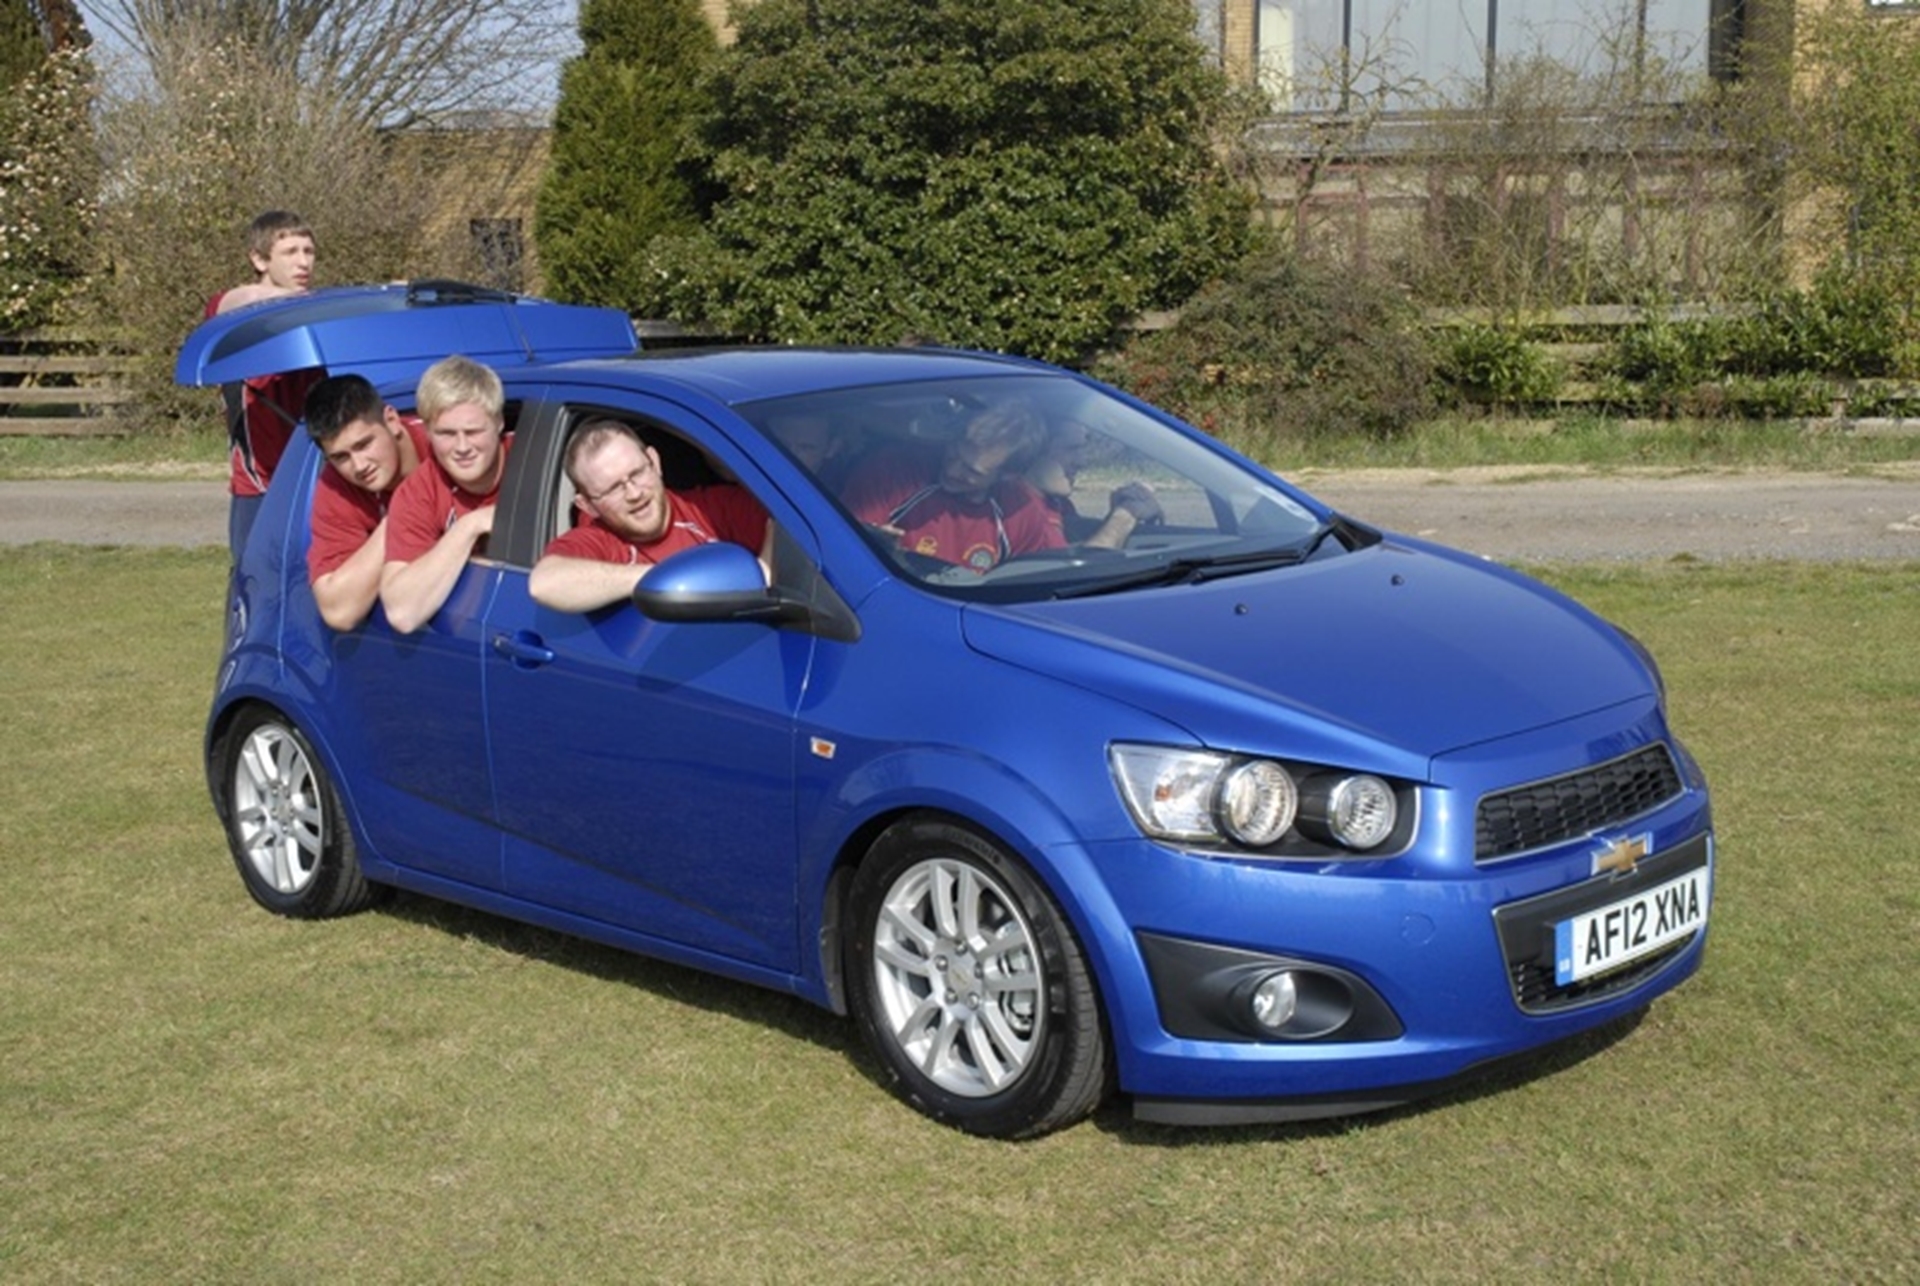 How many rugby players can you fit in a Chevrolet Aveo